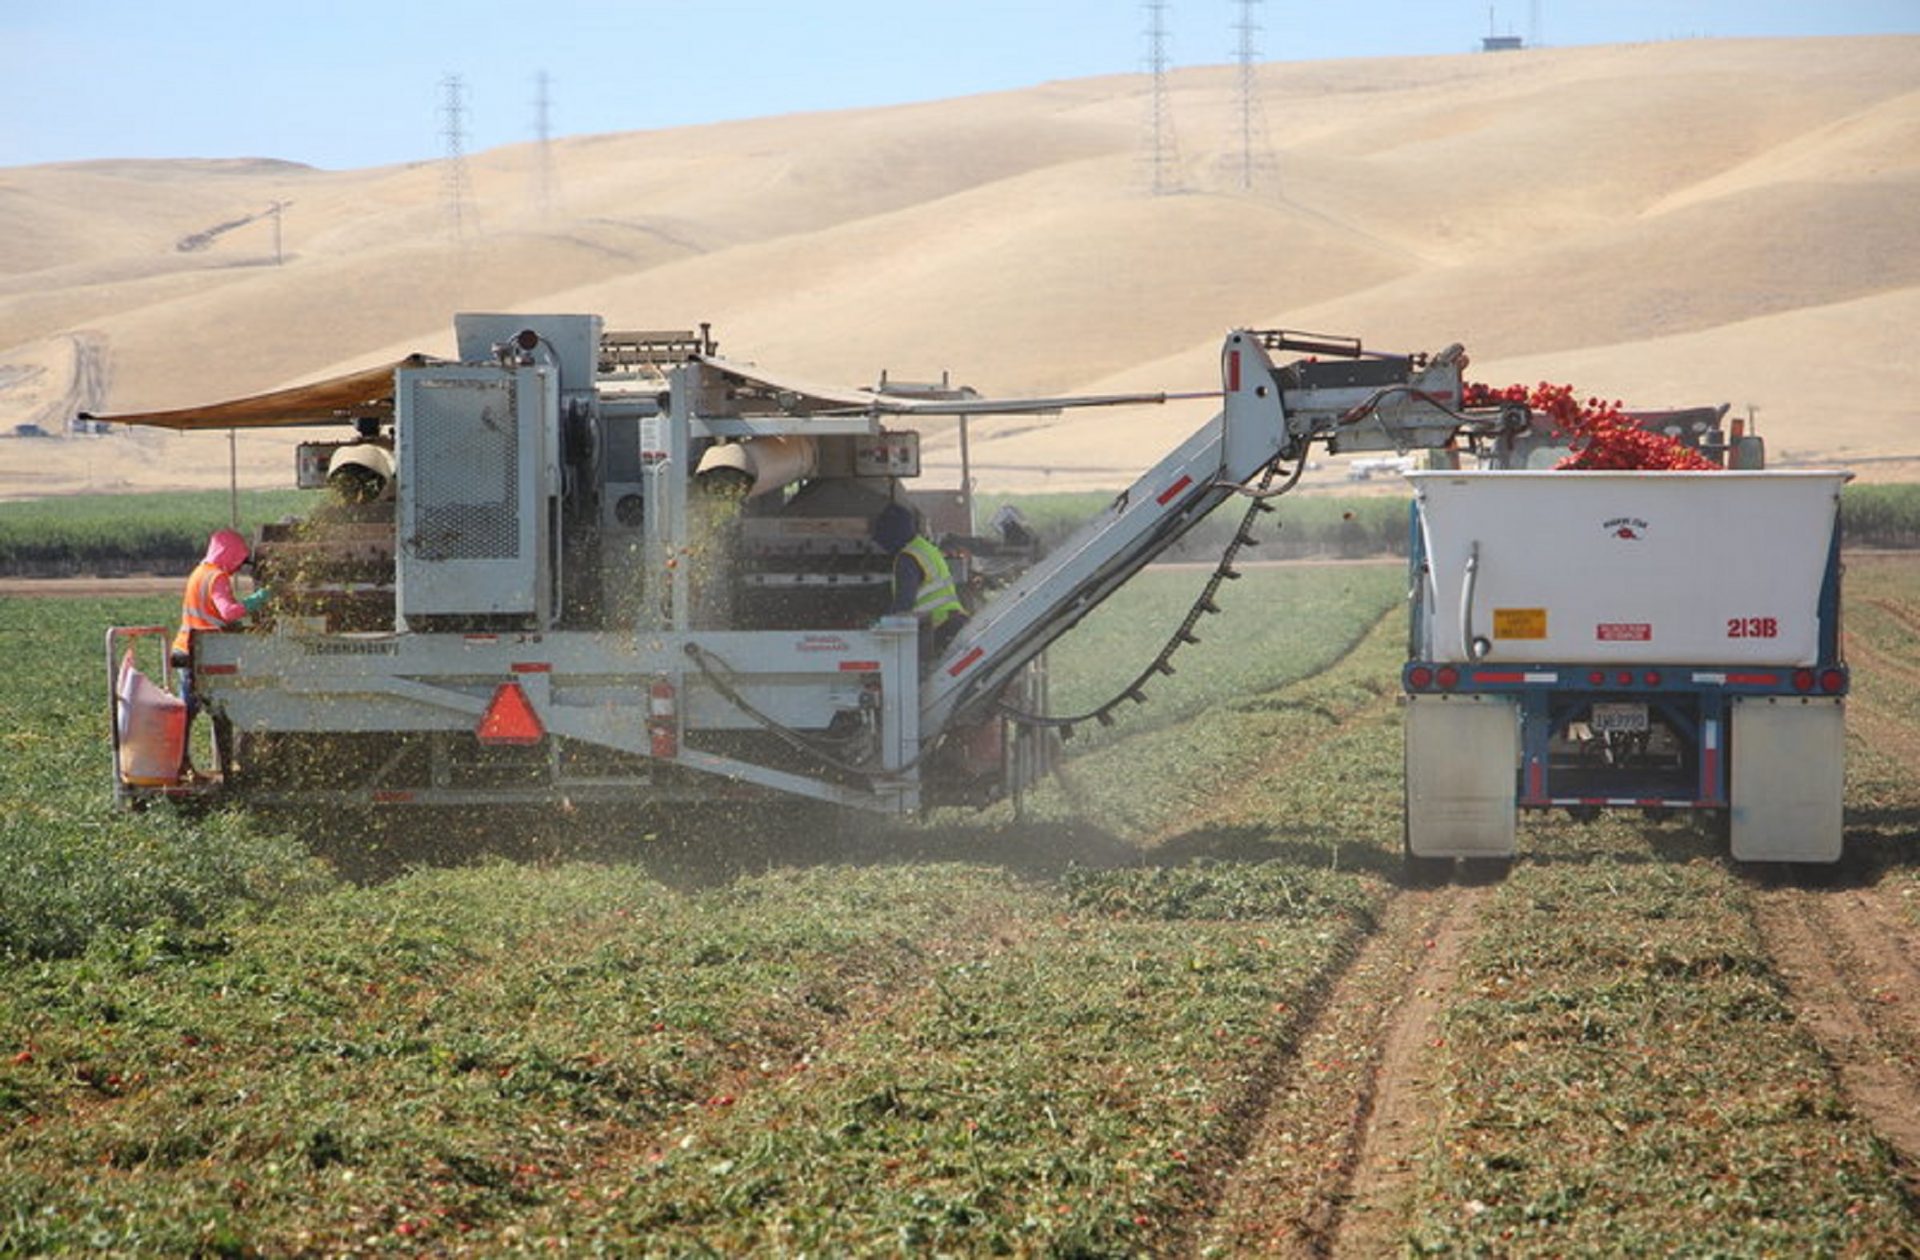 California's Central Valley grows about 12 million tons of tomatoes each year for processing into canned tomato products. They are harvested by machine.